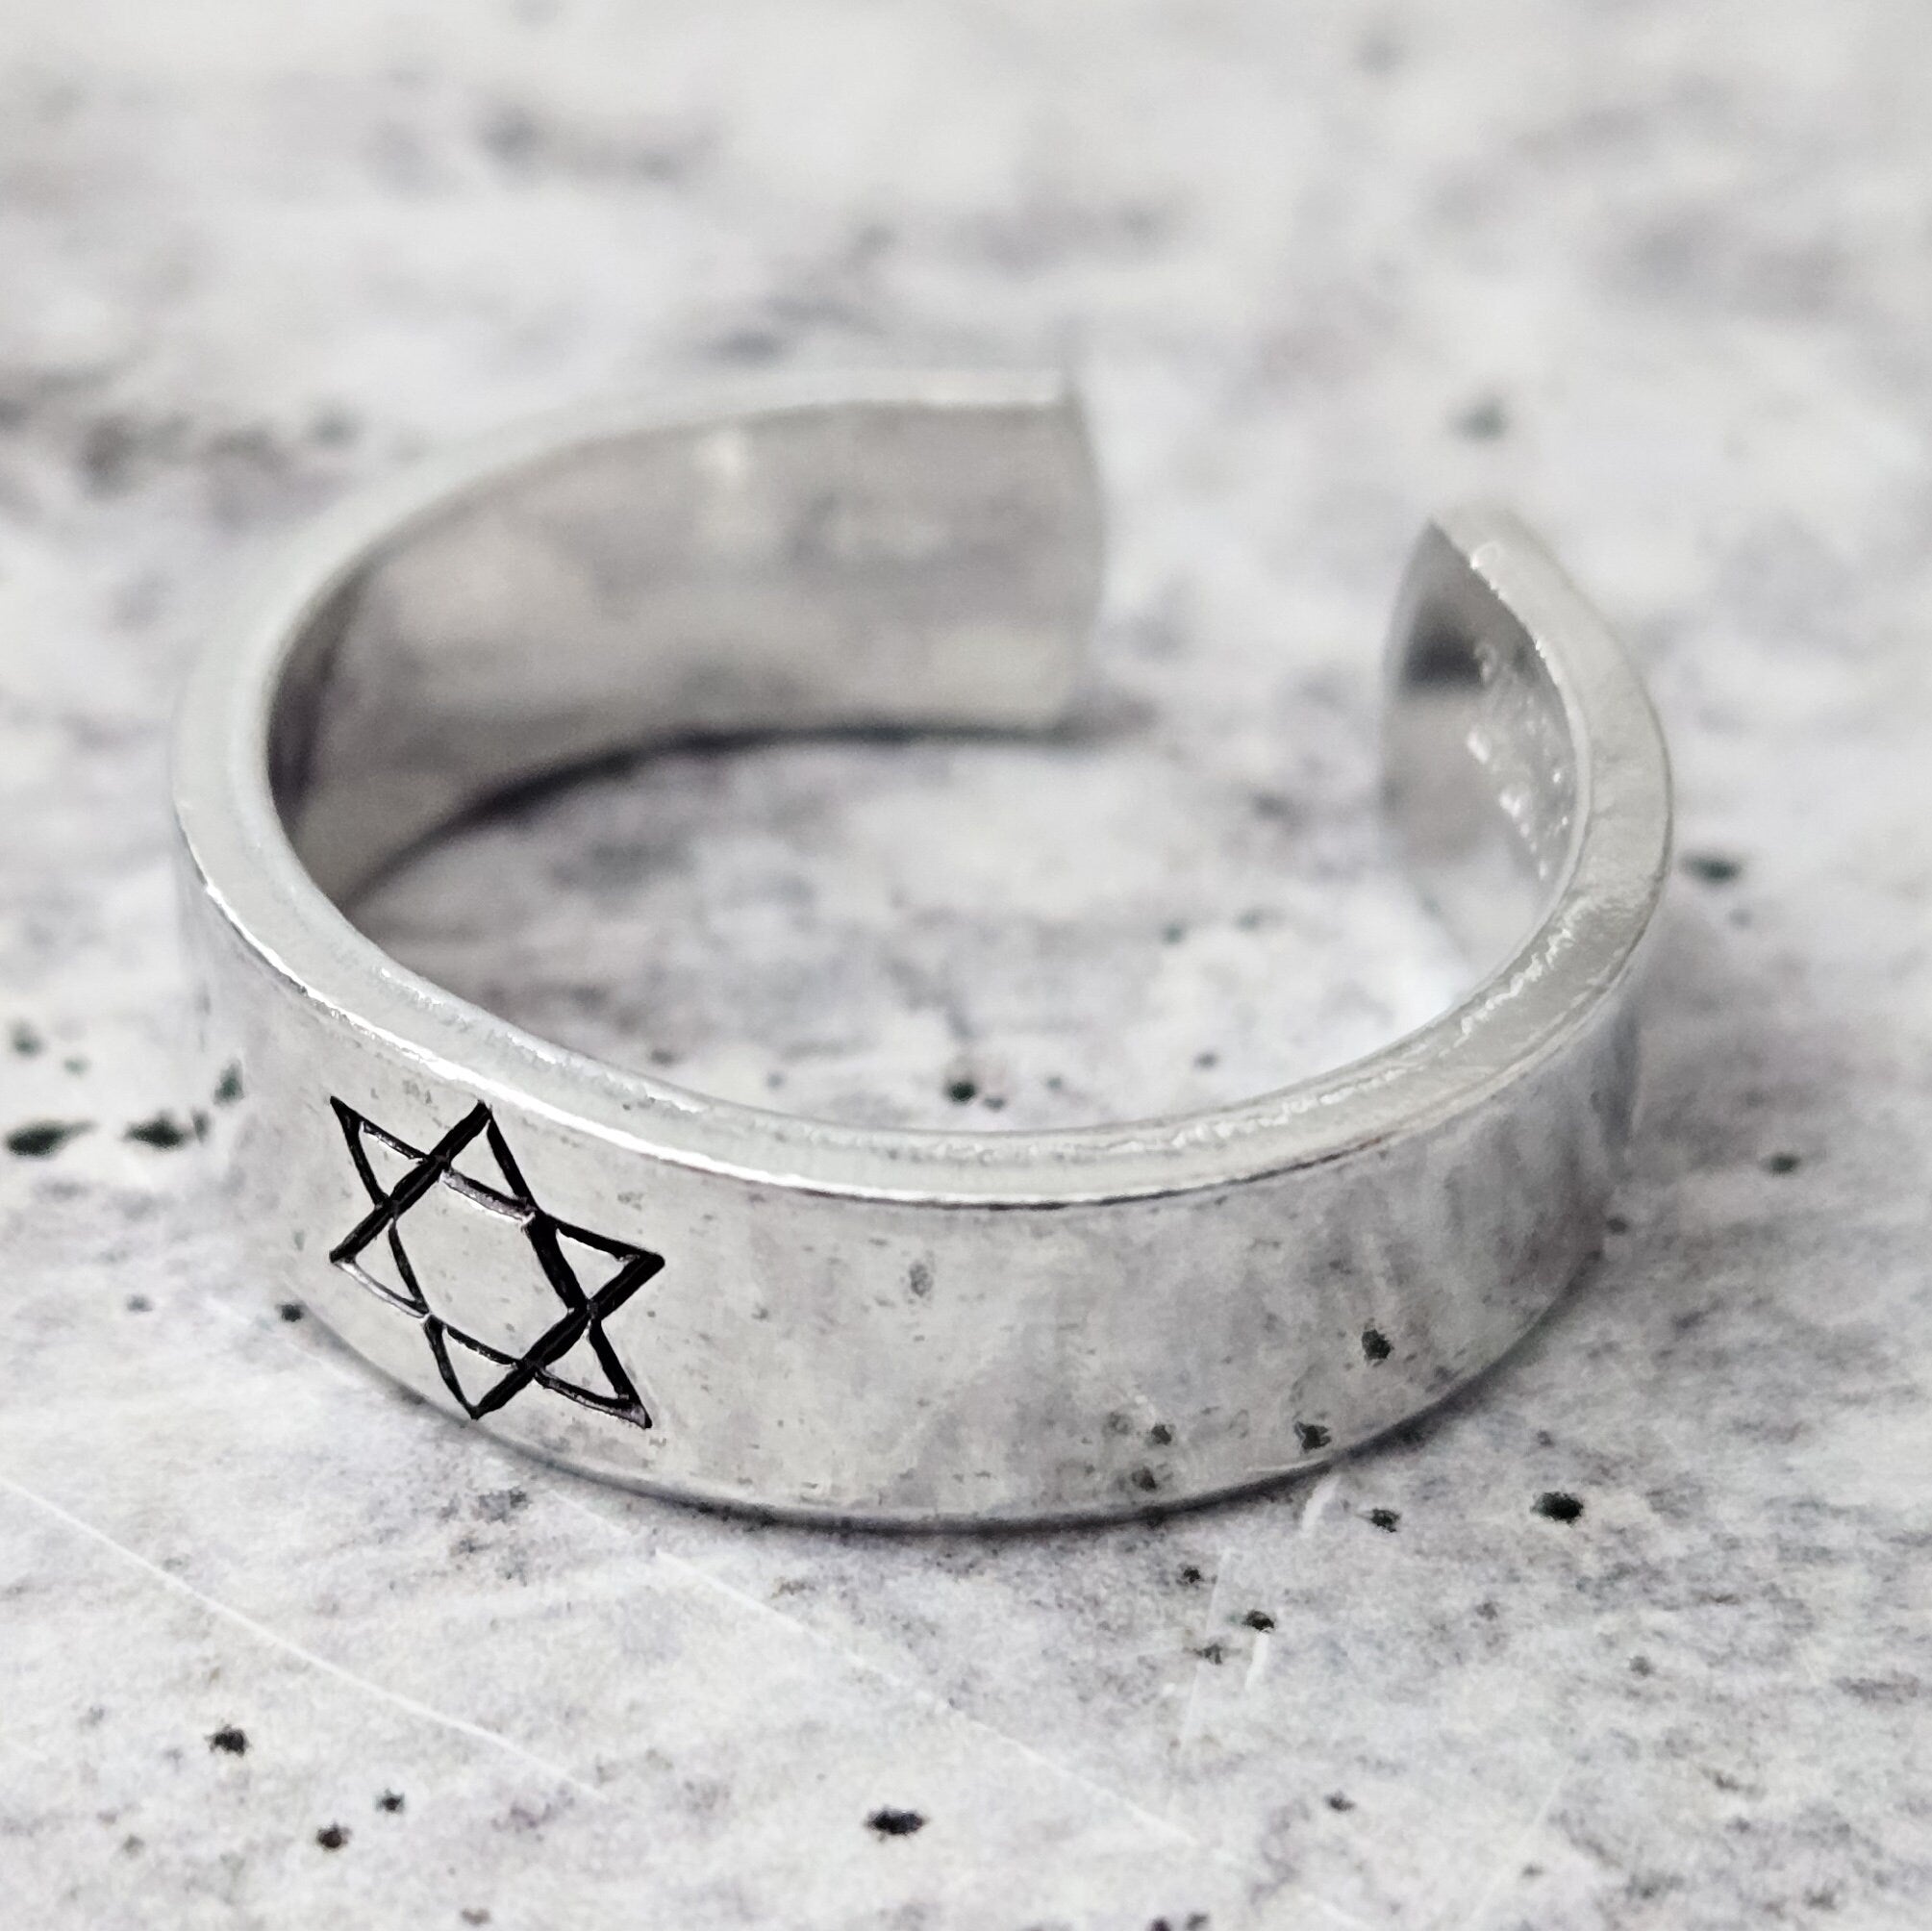 Star of David Open Back Thin Band Ring, Gender Neutral Magen David Jewelry, Minimalist Jewish Star Ring for Him, Stand with Israel Jewelry Salt and Sparkle